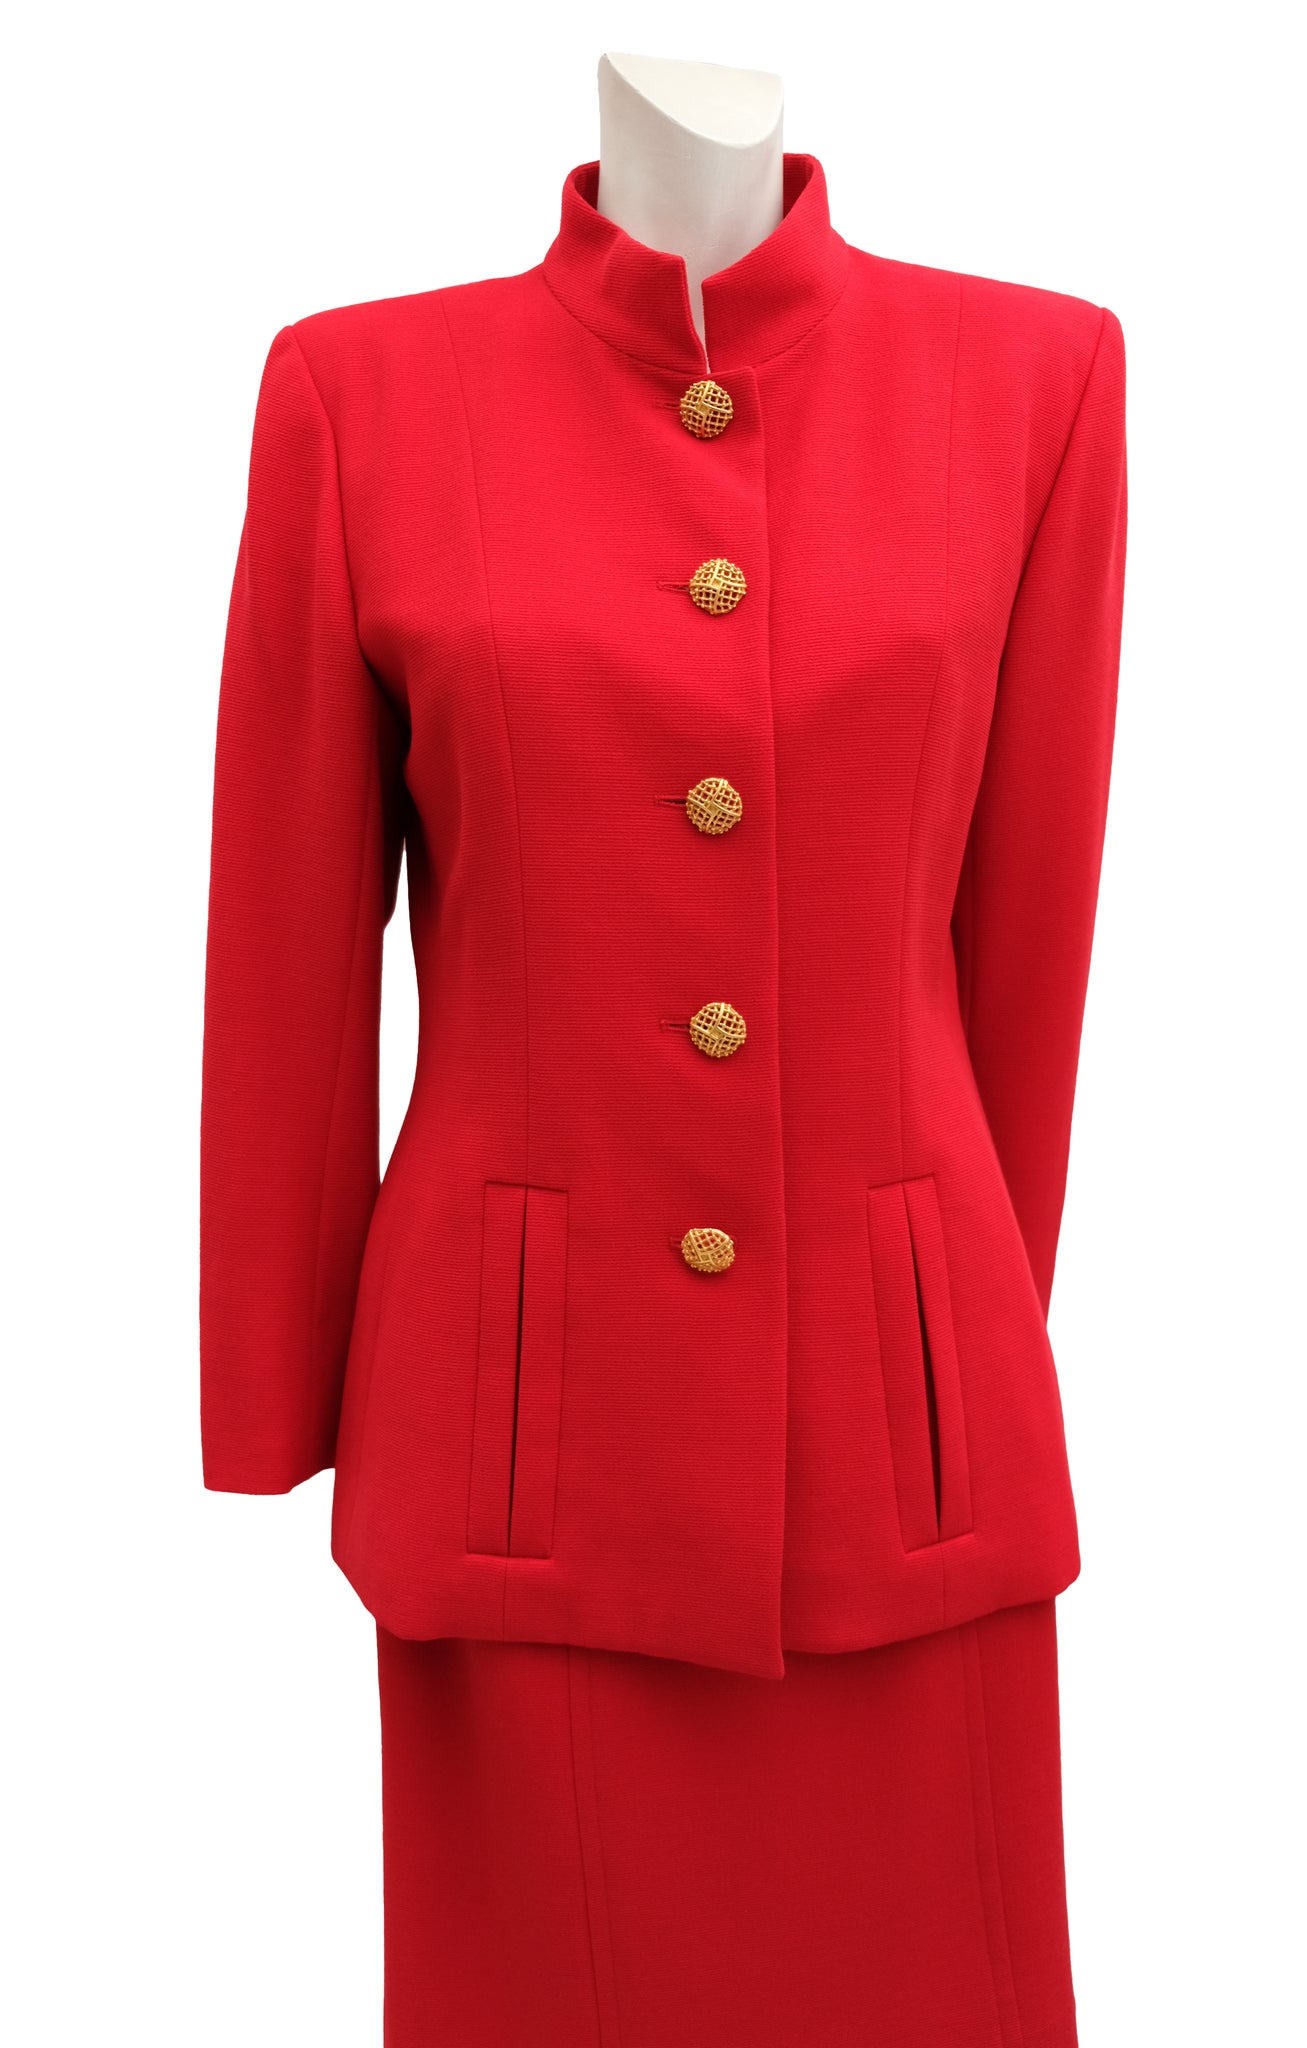 Yves Saint Laurent Skirt Suit in Scarlet Wool with Gold Buttons, UK10 ...